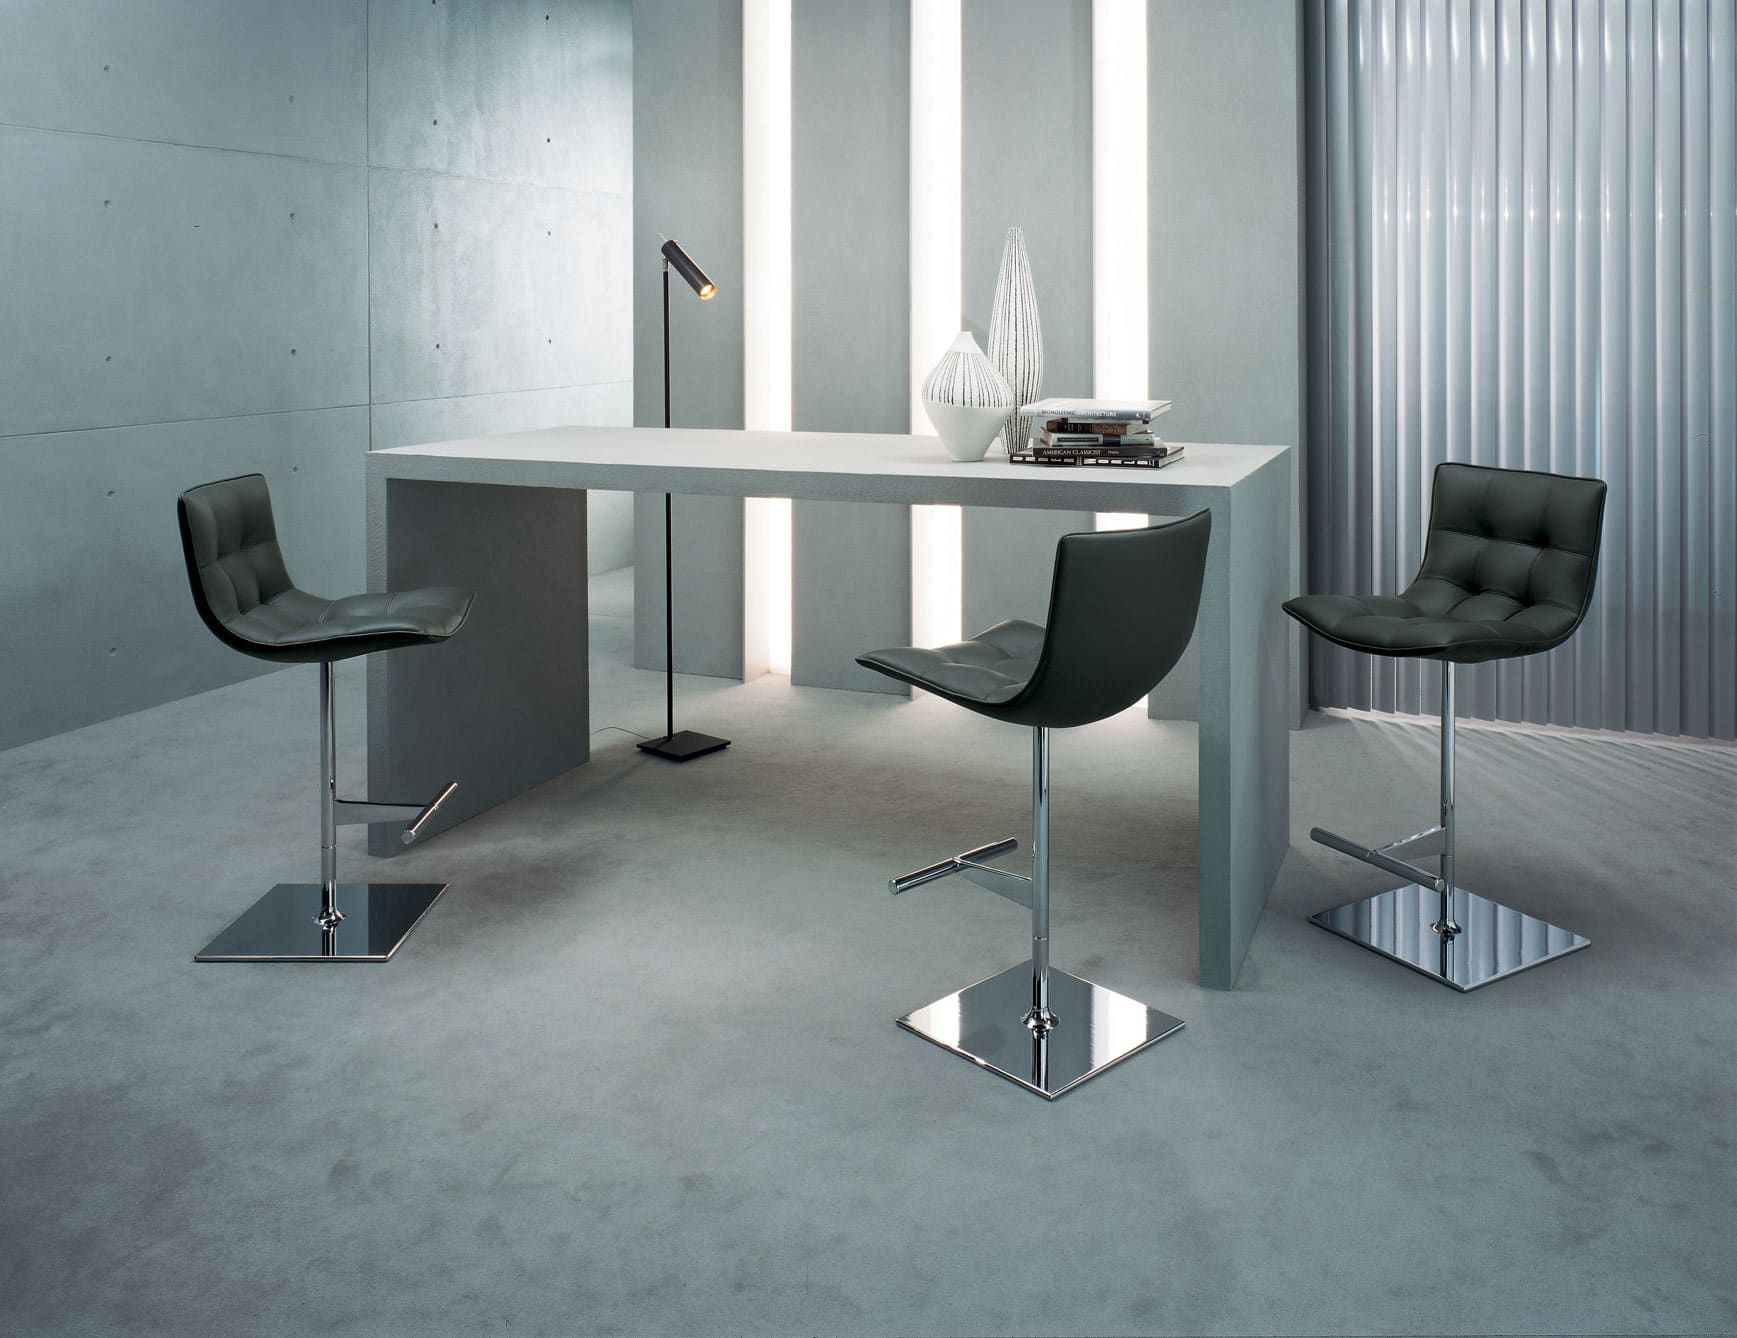 Turkana contemporary Italian office chair with black leather